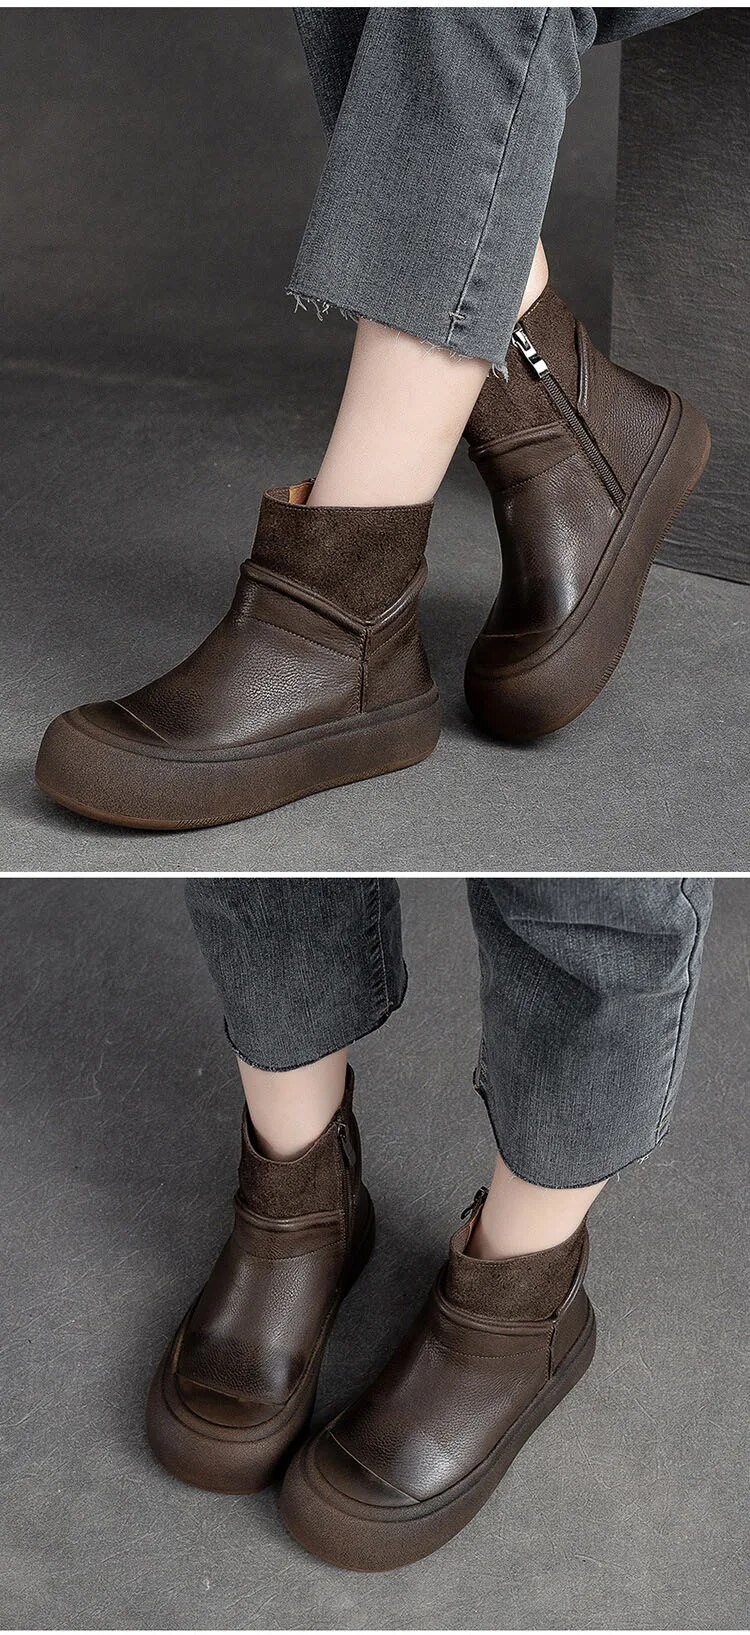 come4buy.com-Chelsea Ankle Boots For Women